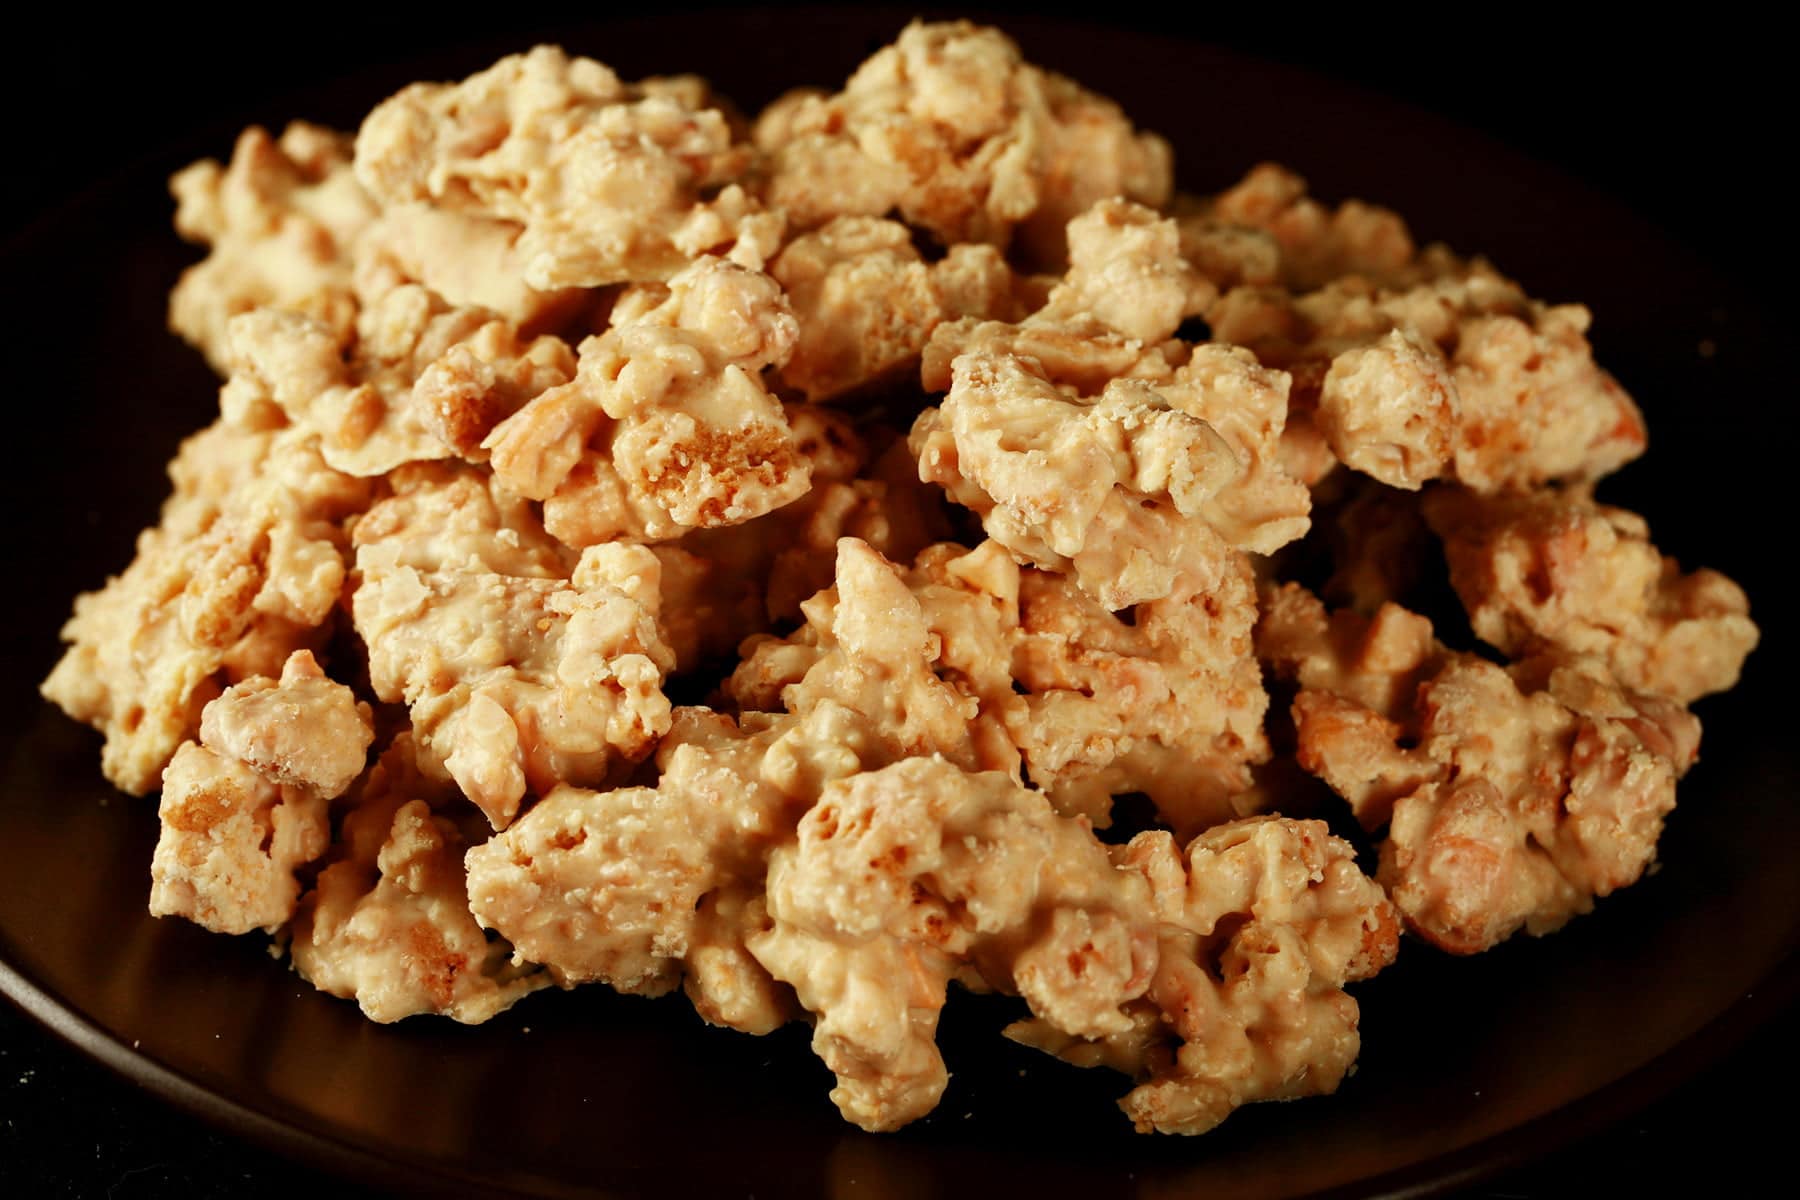 Close up view of homemade Clodhoppers candy: clusters of cashew pieces, graham crackers, and white chocolate.